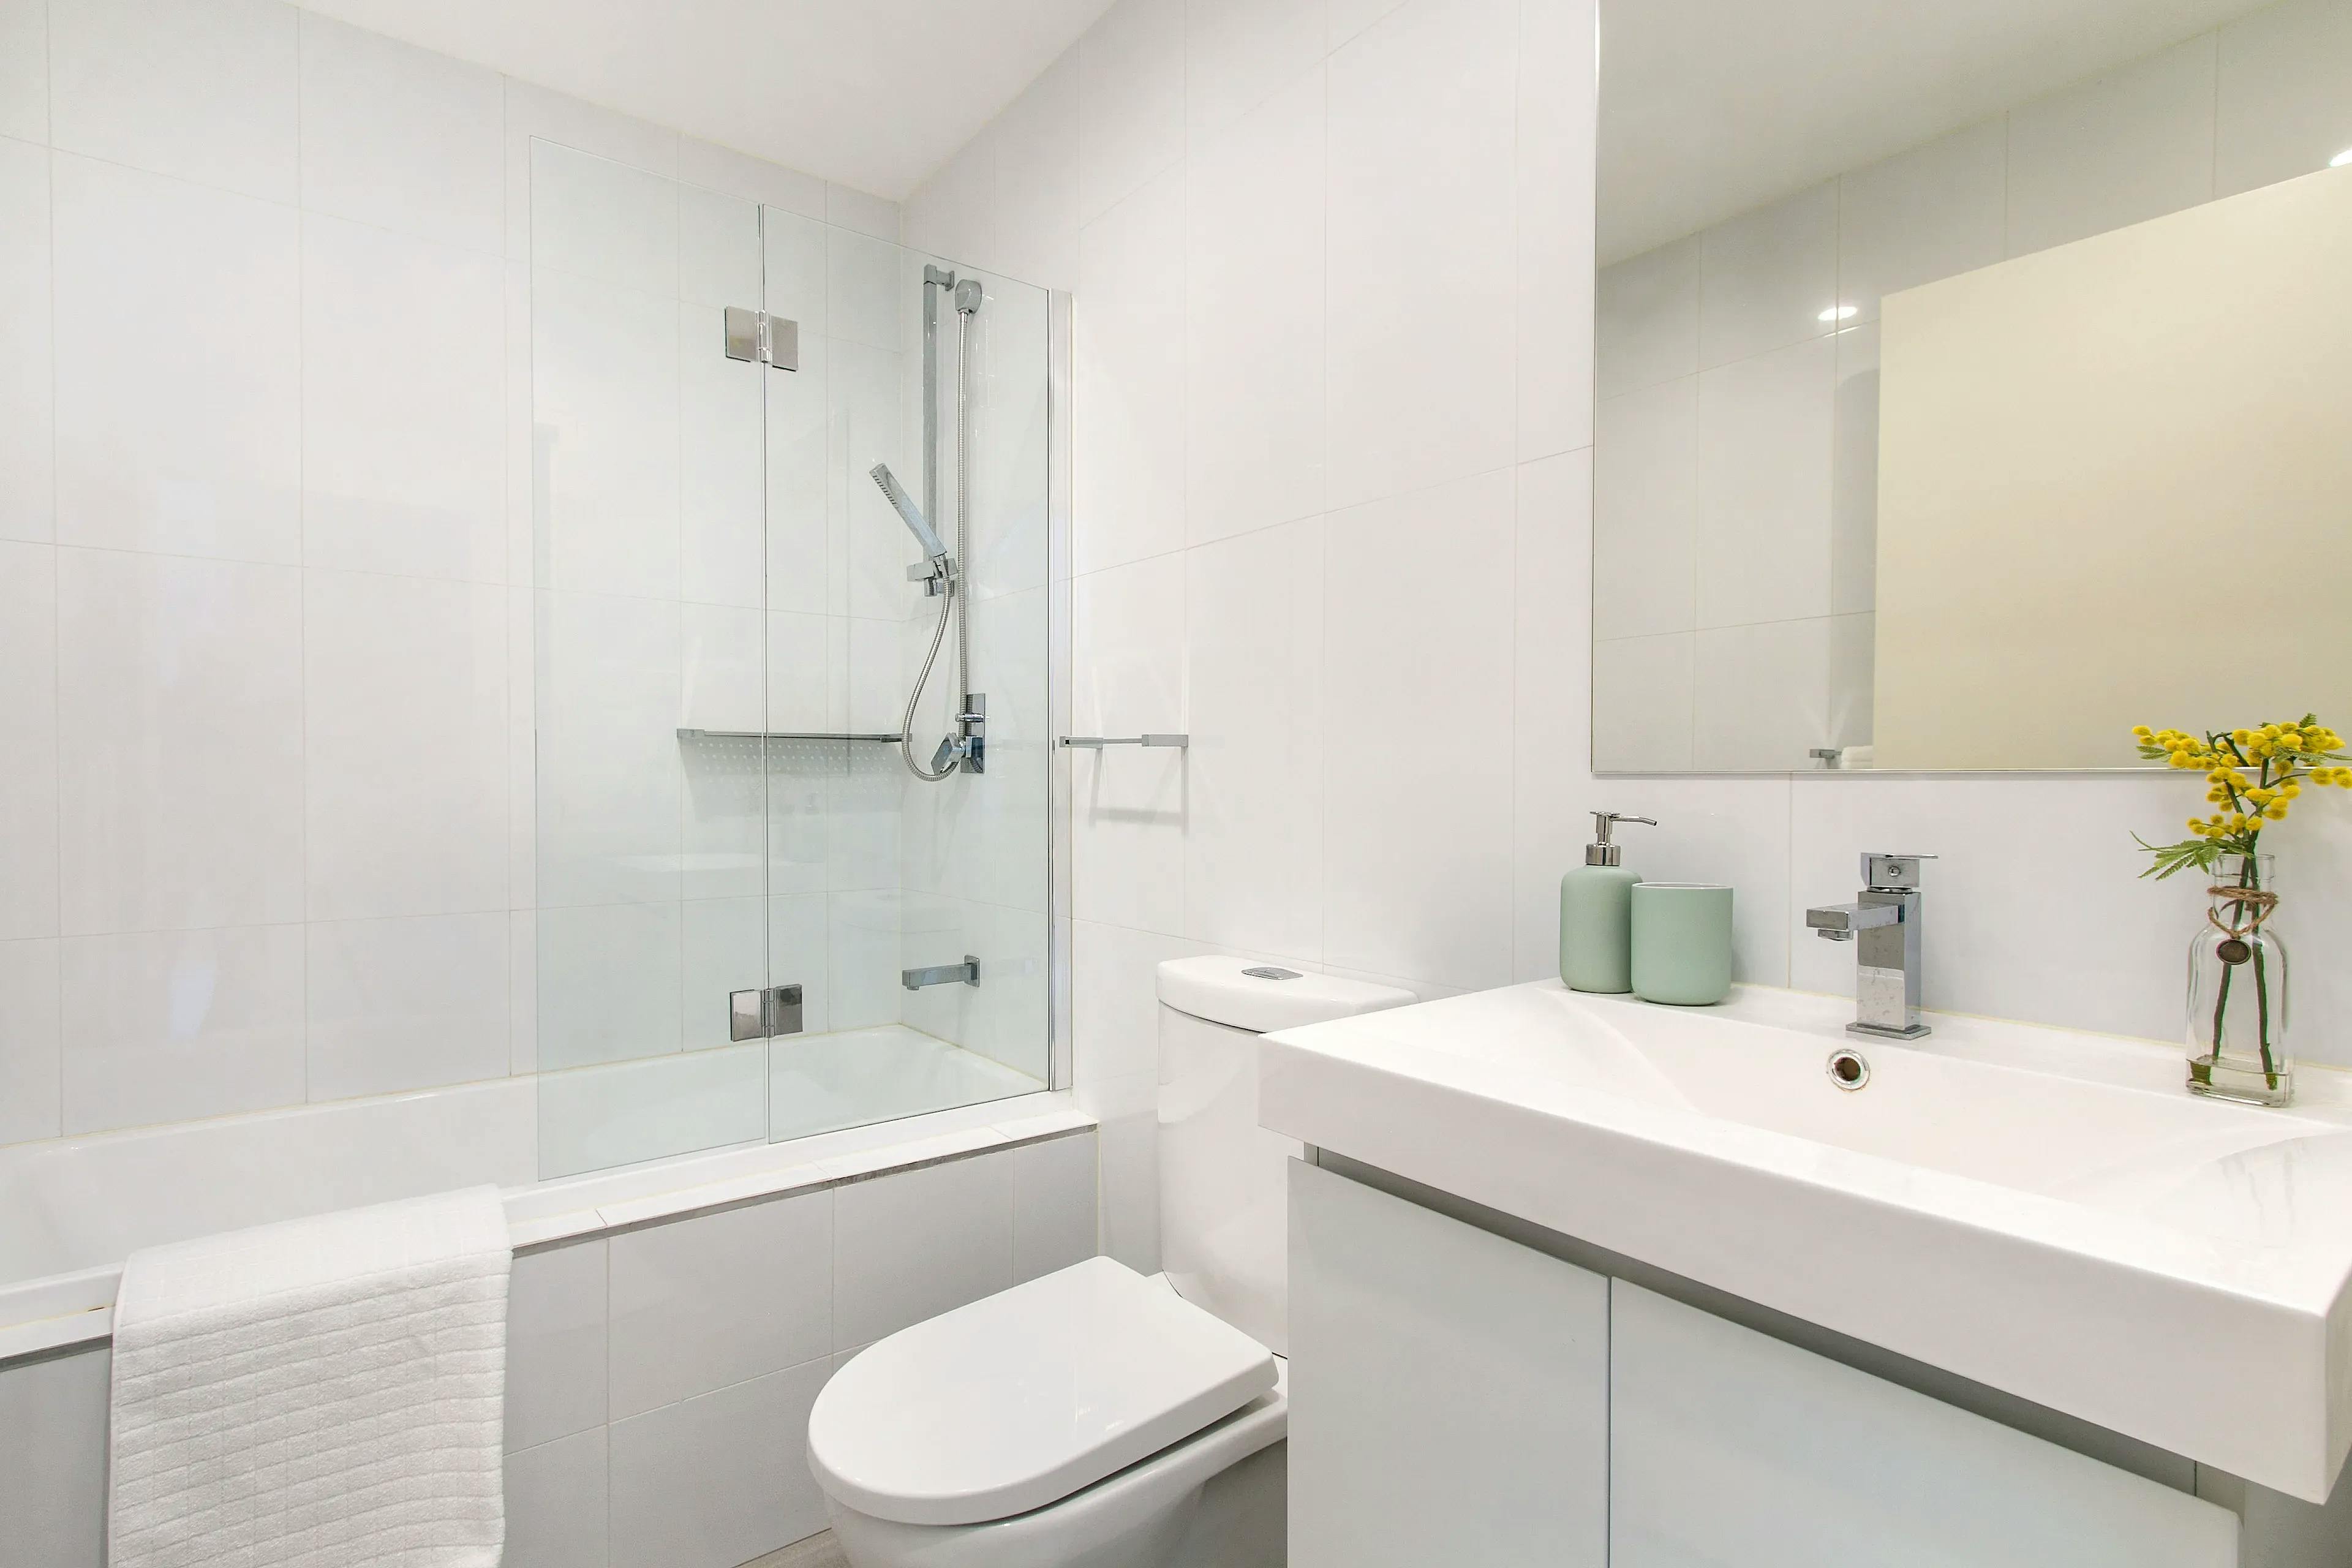 Bathroom setting with all-white walls, a bathtub featuring a glass shower panel, and a white sink accompanied by a rectangular mirror